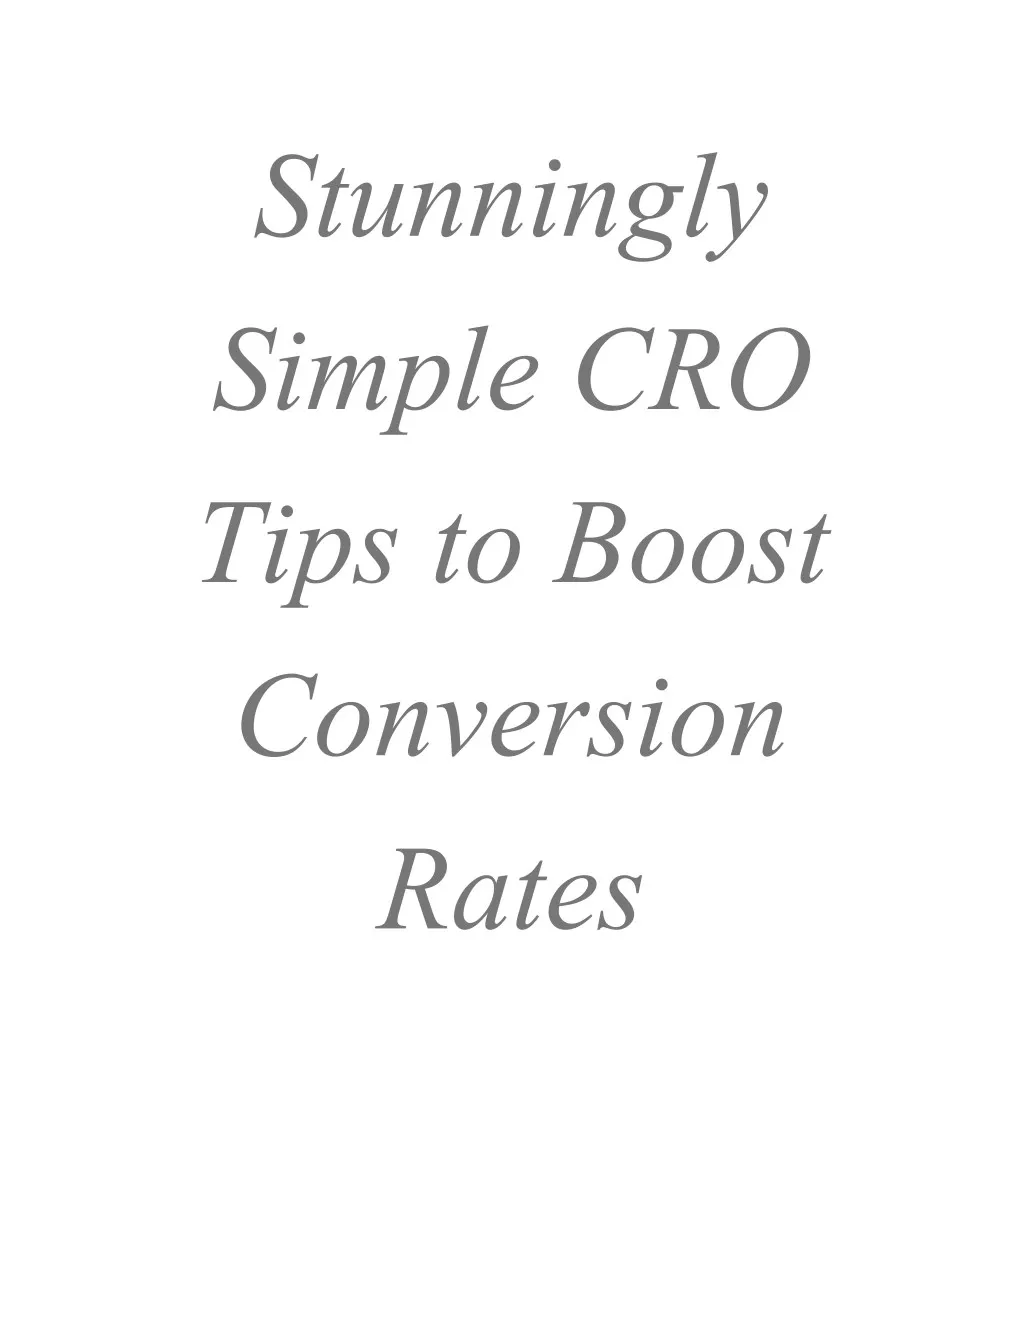 stunningly simple cro tips to boost conversion